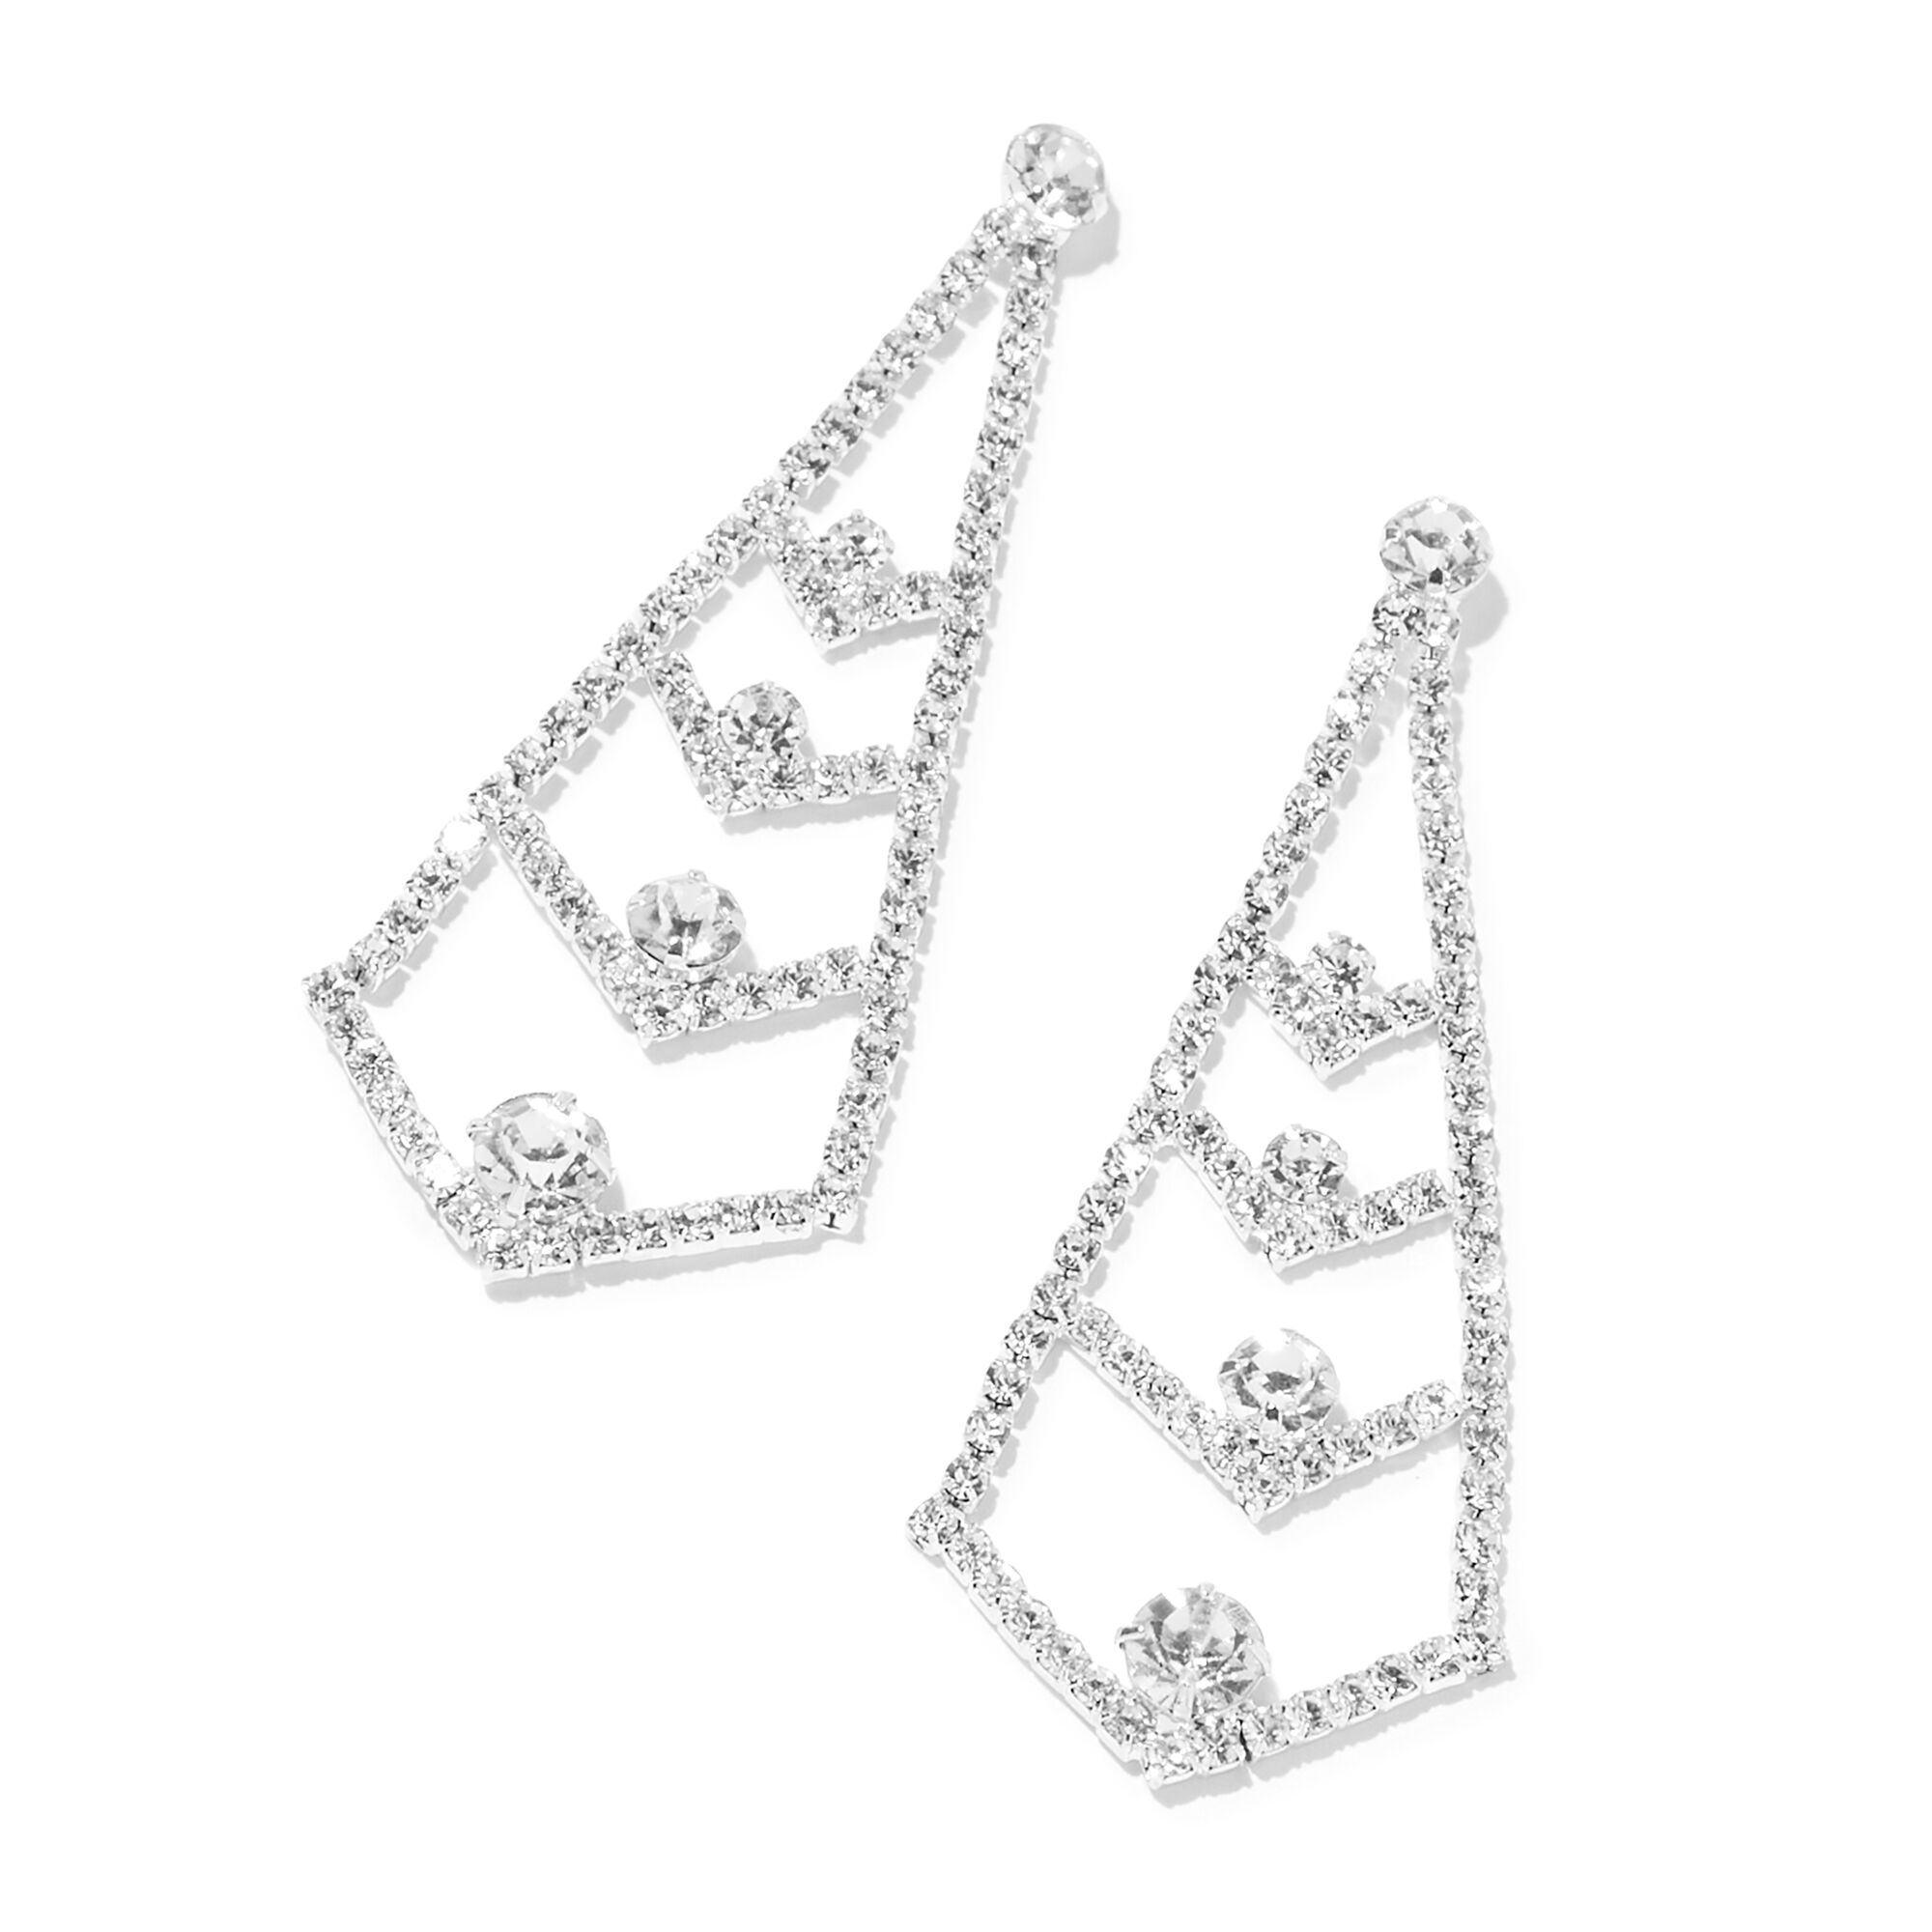 View Claires Tone Pyramid Chandelier Drop Earrings Silver information